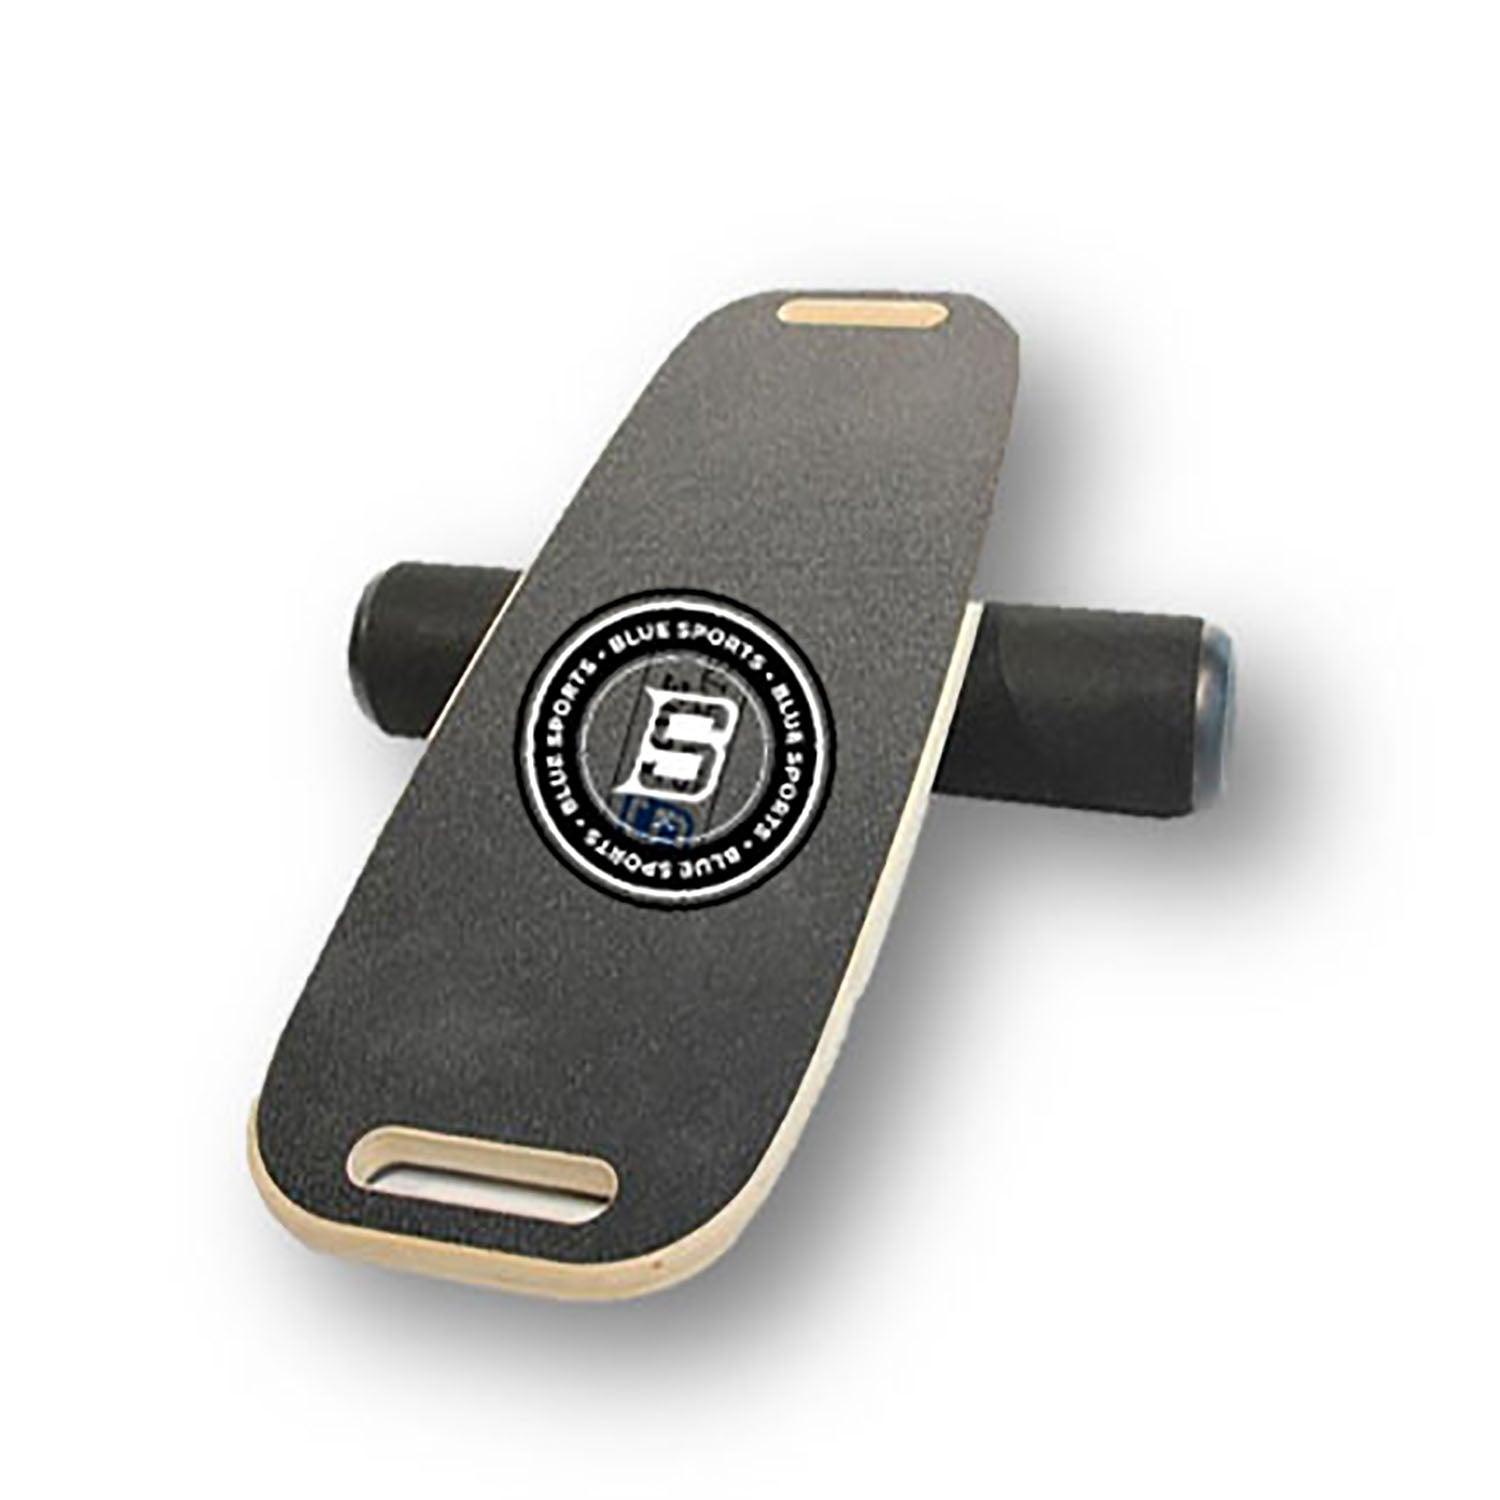 BALANCE BOARD TRAINING TOOL - Sports Excellence